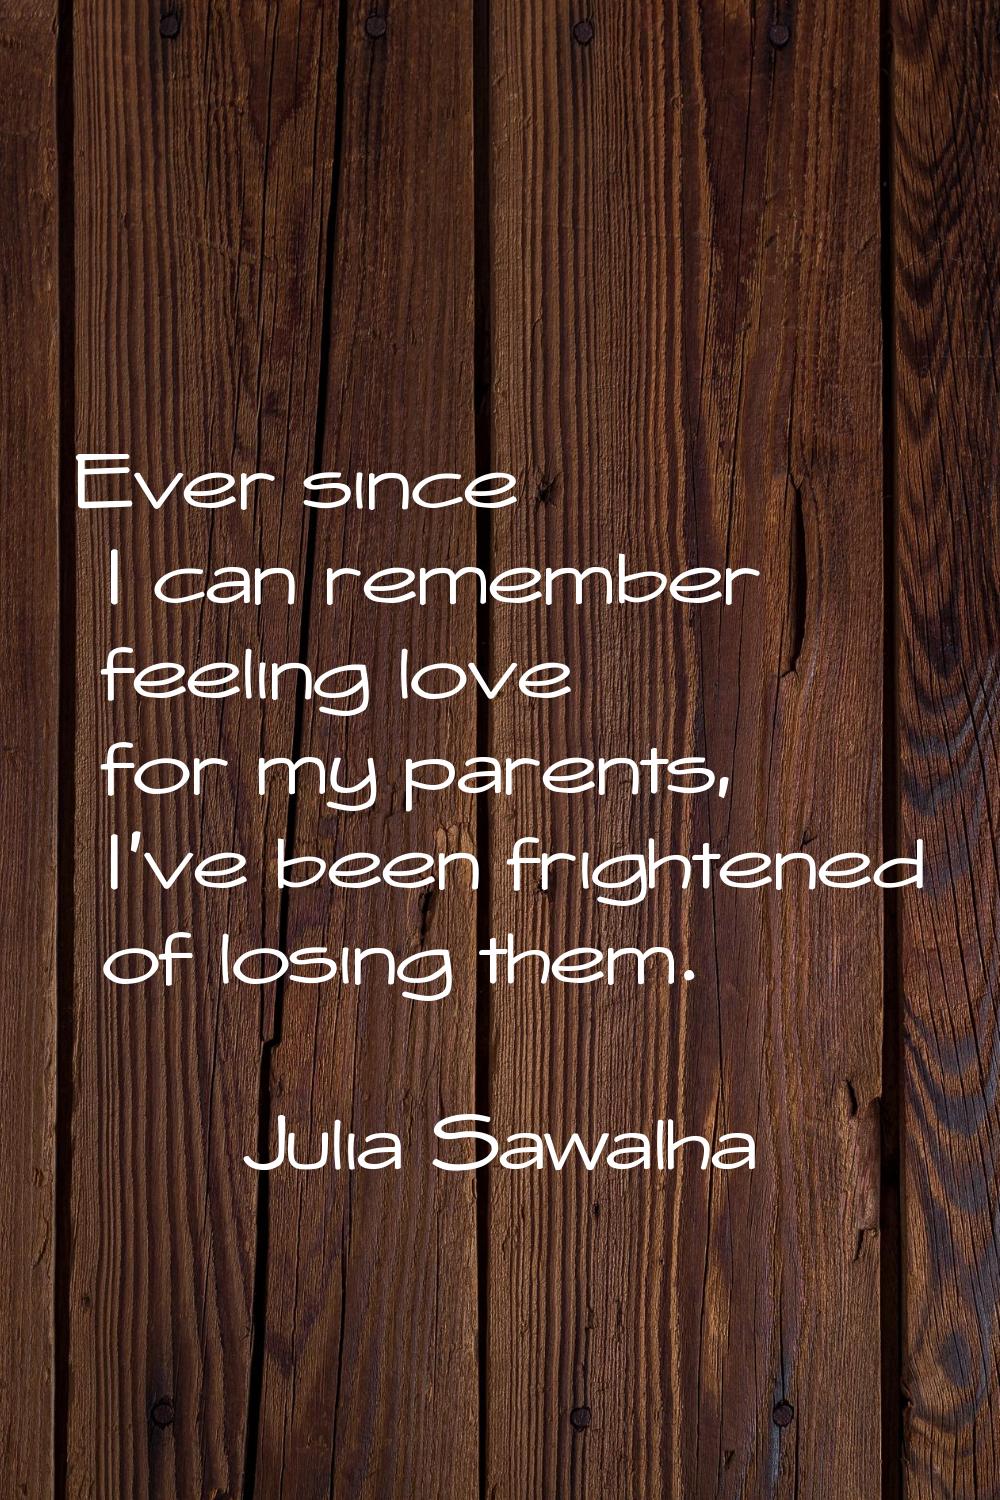 Ever since I can remember feeling love for my parents, I've been frightened of losing them.